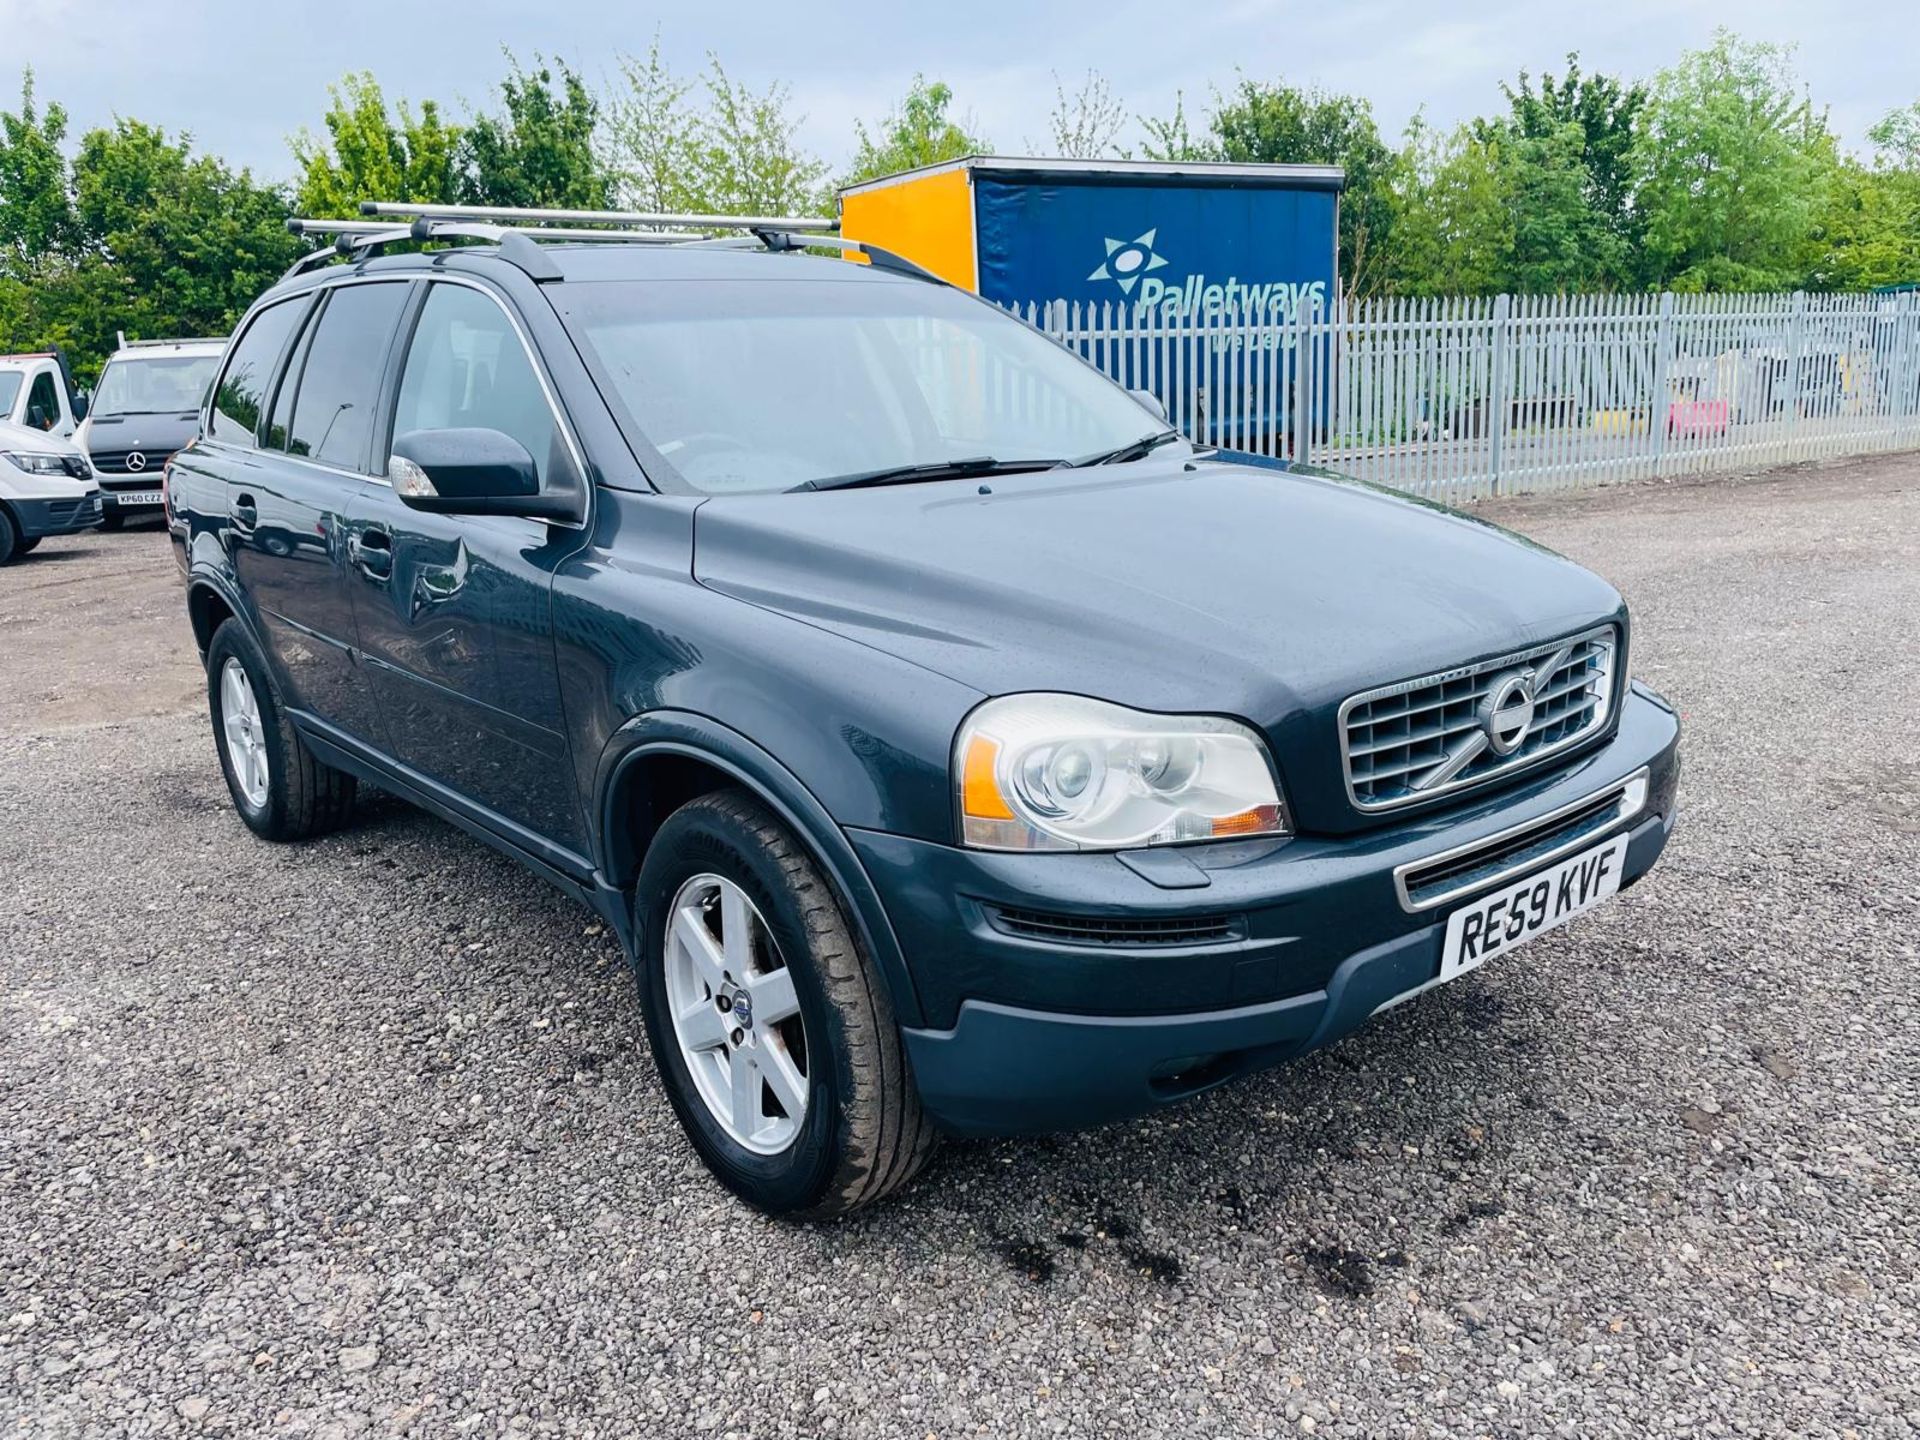 Volvo XC90 D5 185 Active 2.4 2009 '59 Reg' -7 Seats-Air Conditioning-Power Mirrors-Automatic-No Vat